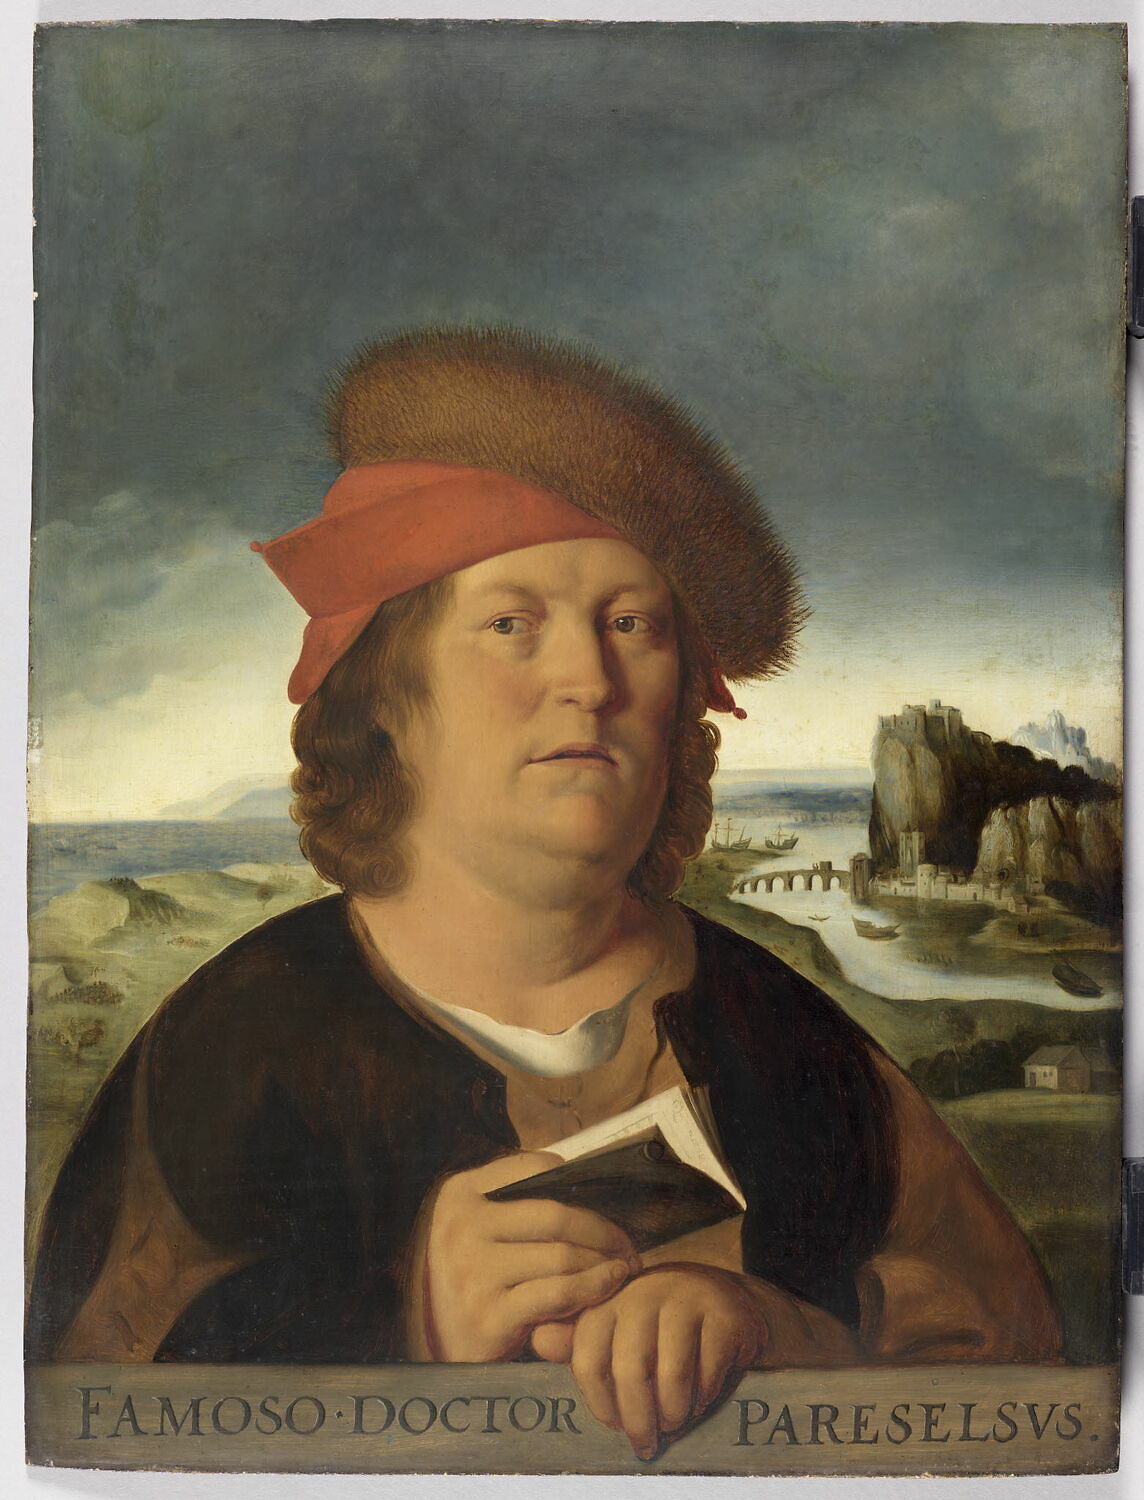 A portrait of Paracelsus, holding a book; with inscription meaning 'well-known doctor Paracelsus'